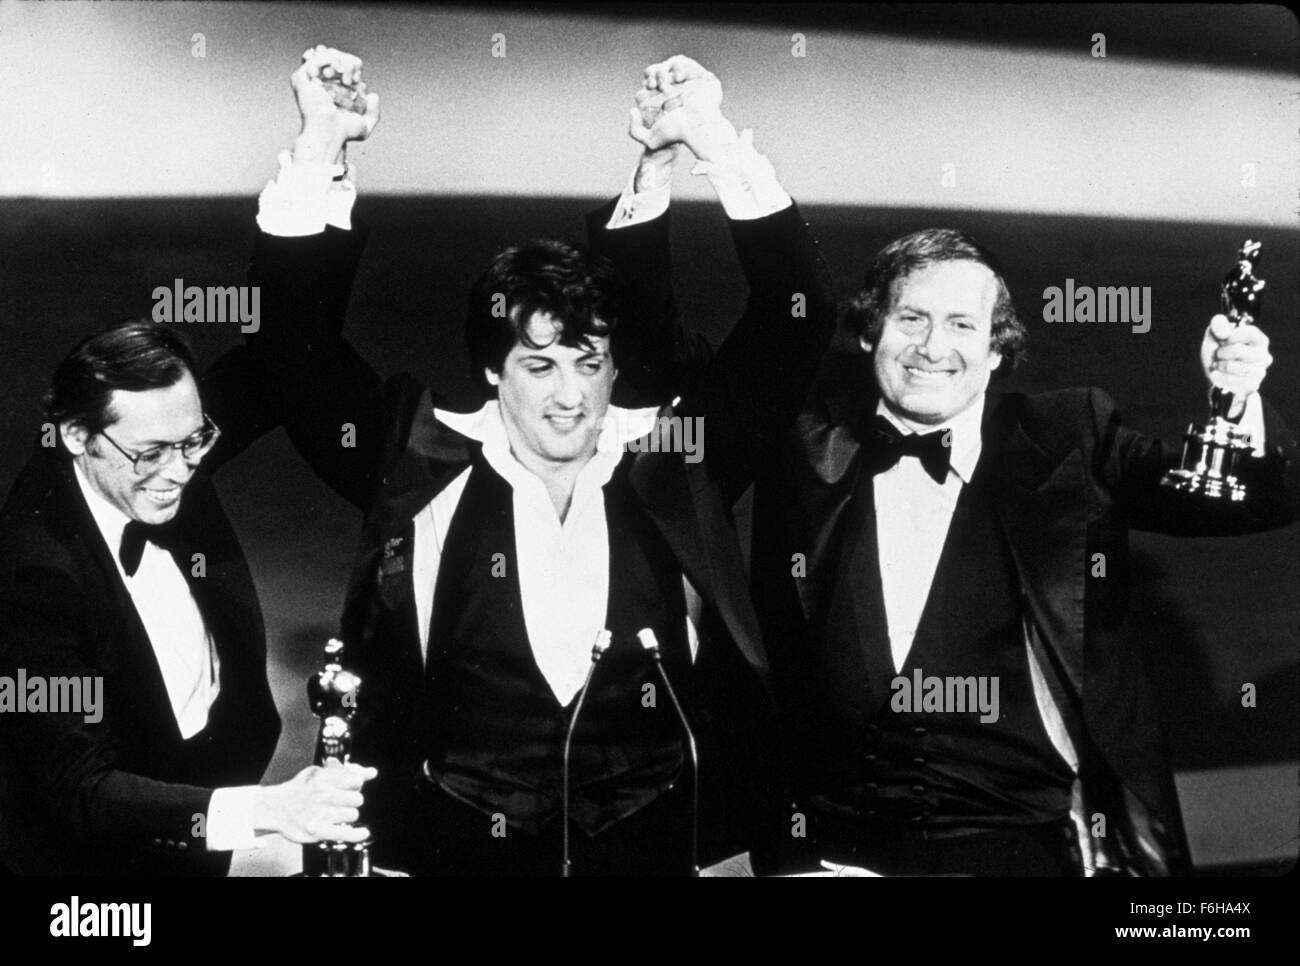 1976, Film Title: ROCKY, Pictured: 1976, ACADEMY AWARDS CEREMONIES, ACCESSORIES, AWARDS - ACADEMY, BEST PICTURE, ROBERT CHARTOFF, DOROTHY CHANDLER PAVILION, OSCAR (ACADEMY AWARD STATUE), SYLVESTER STALLONE, IRWIN WINKLER, OSCAR RETRO. (Credit Image: SNAP) (Credit Image: c SNAP/Entertainment Pictures) Stock Photo